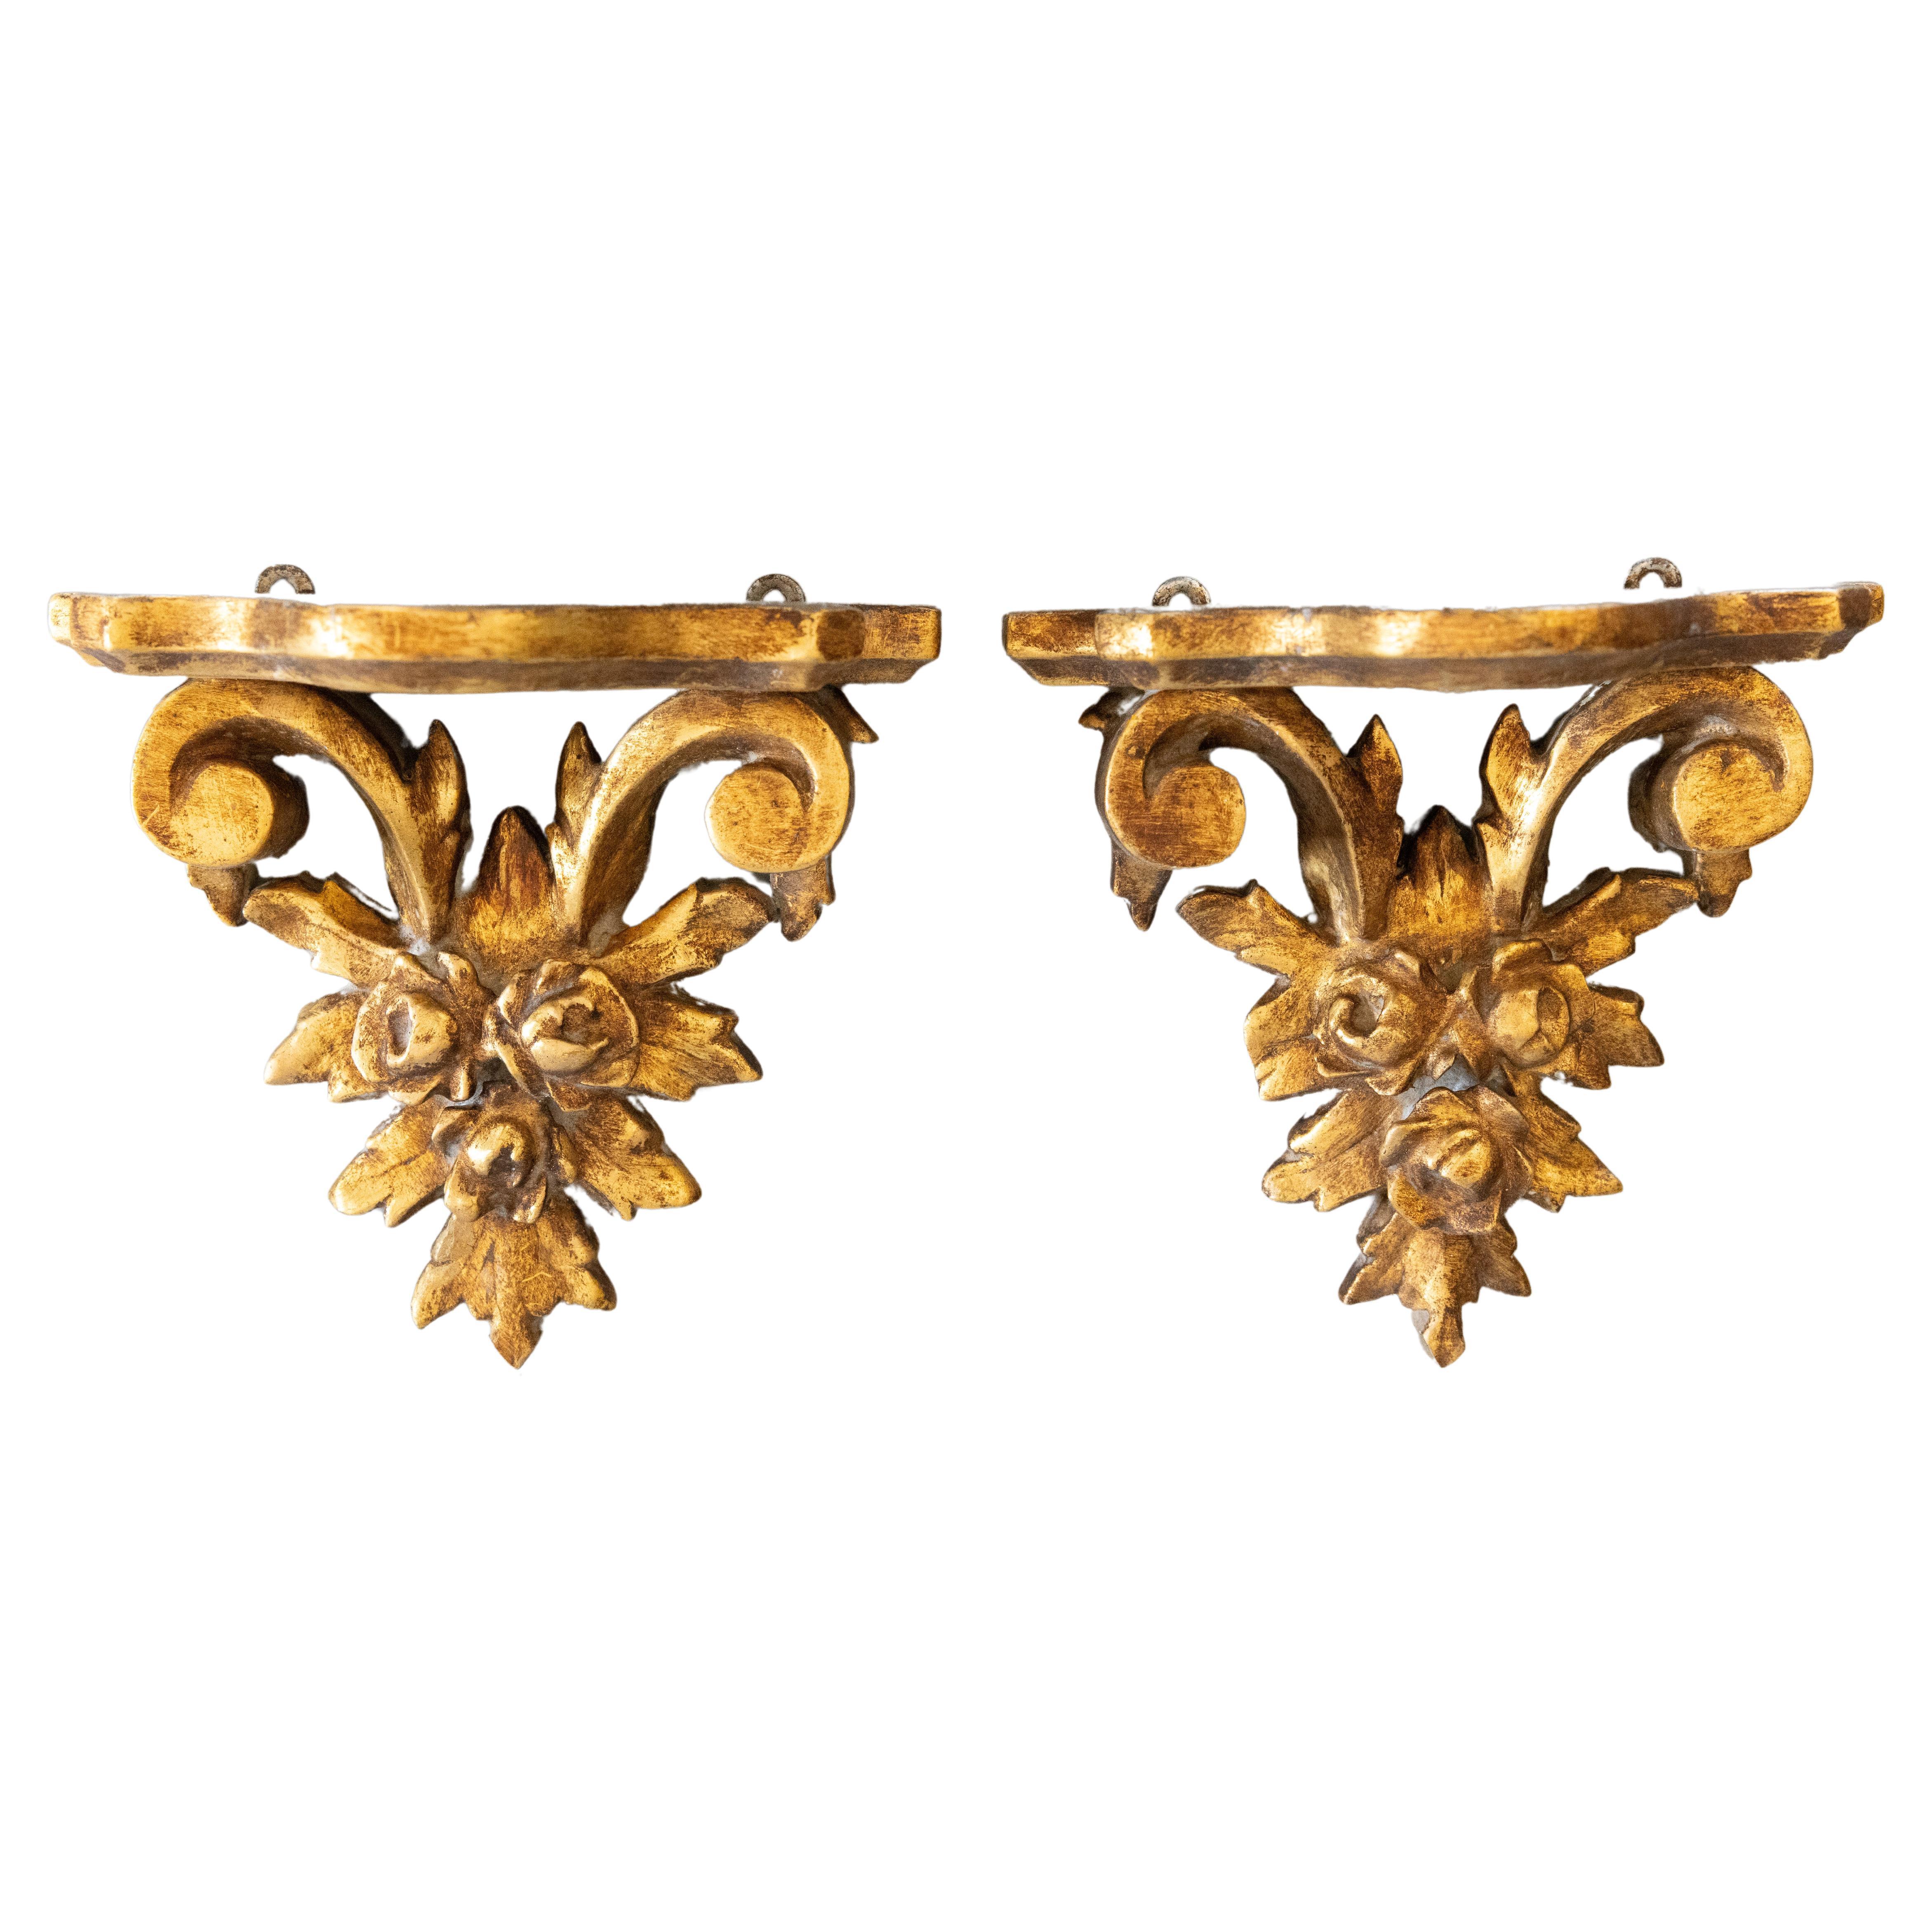 Pair of Mid-20th Century Italian Giltwood Roses Wall Brackets Shelves For Sale